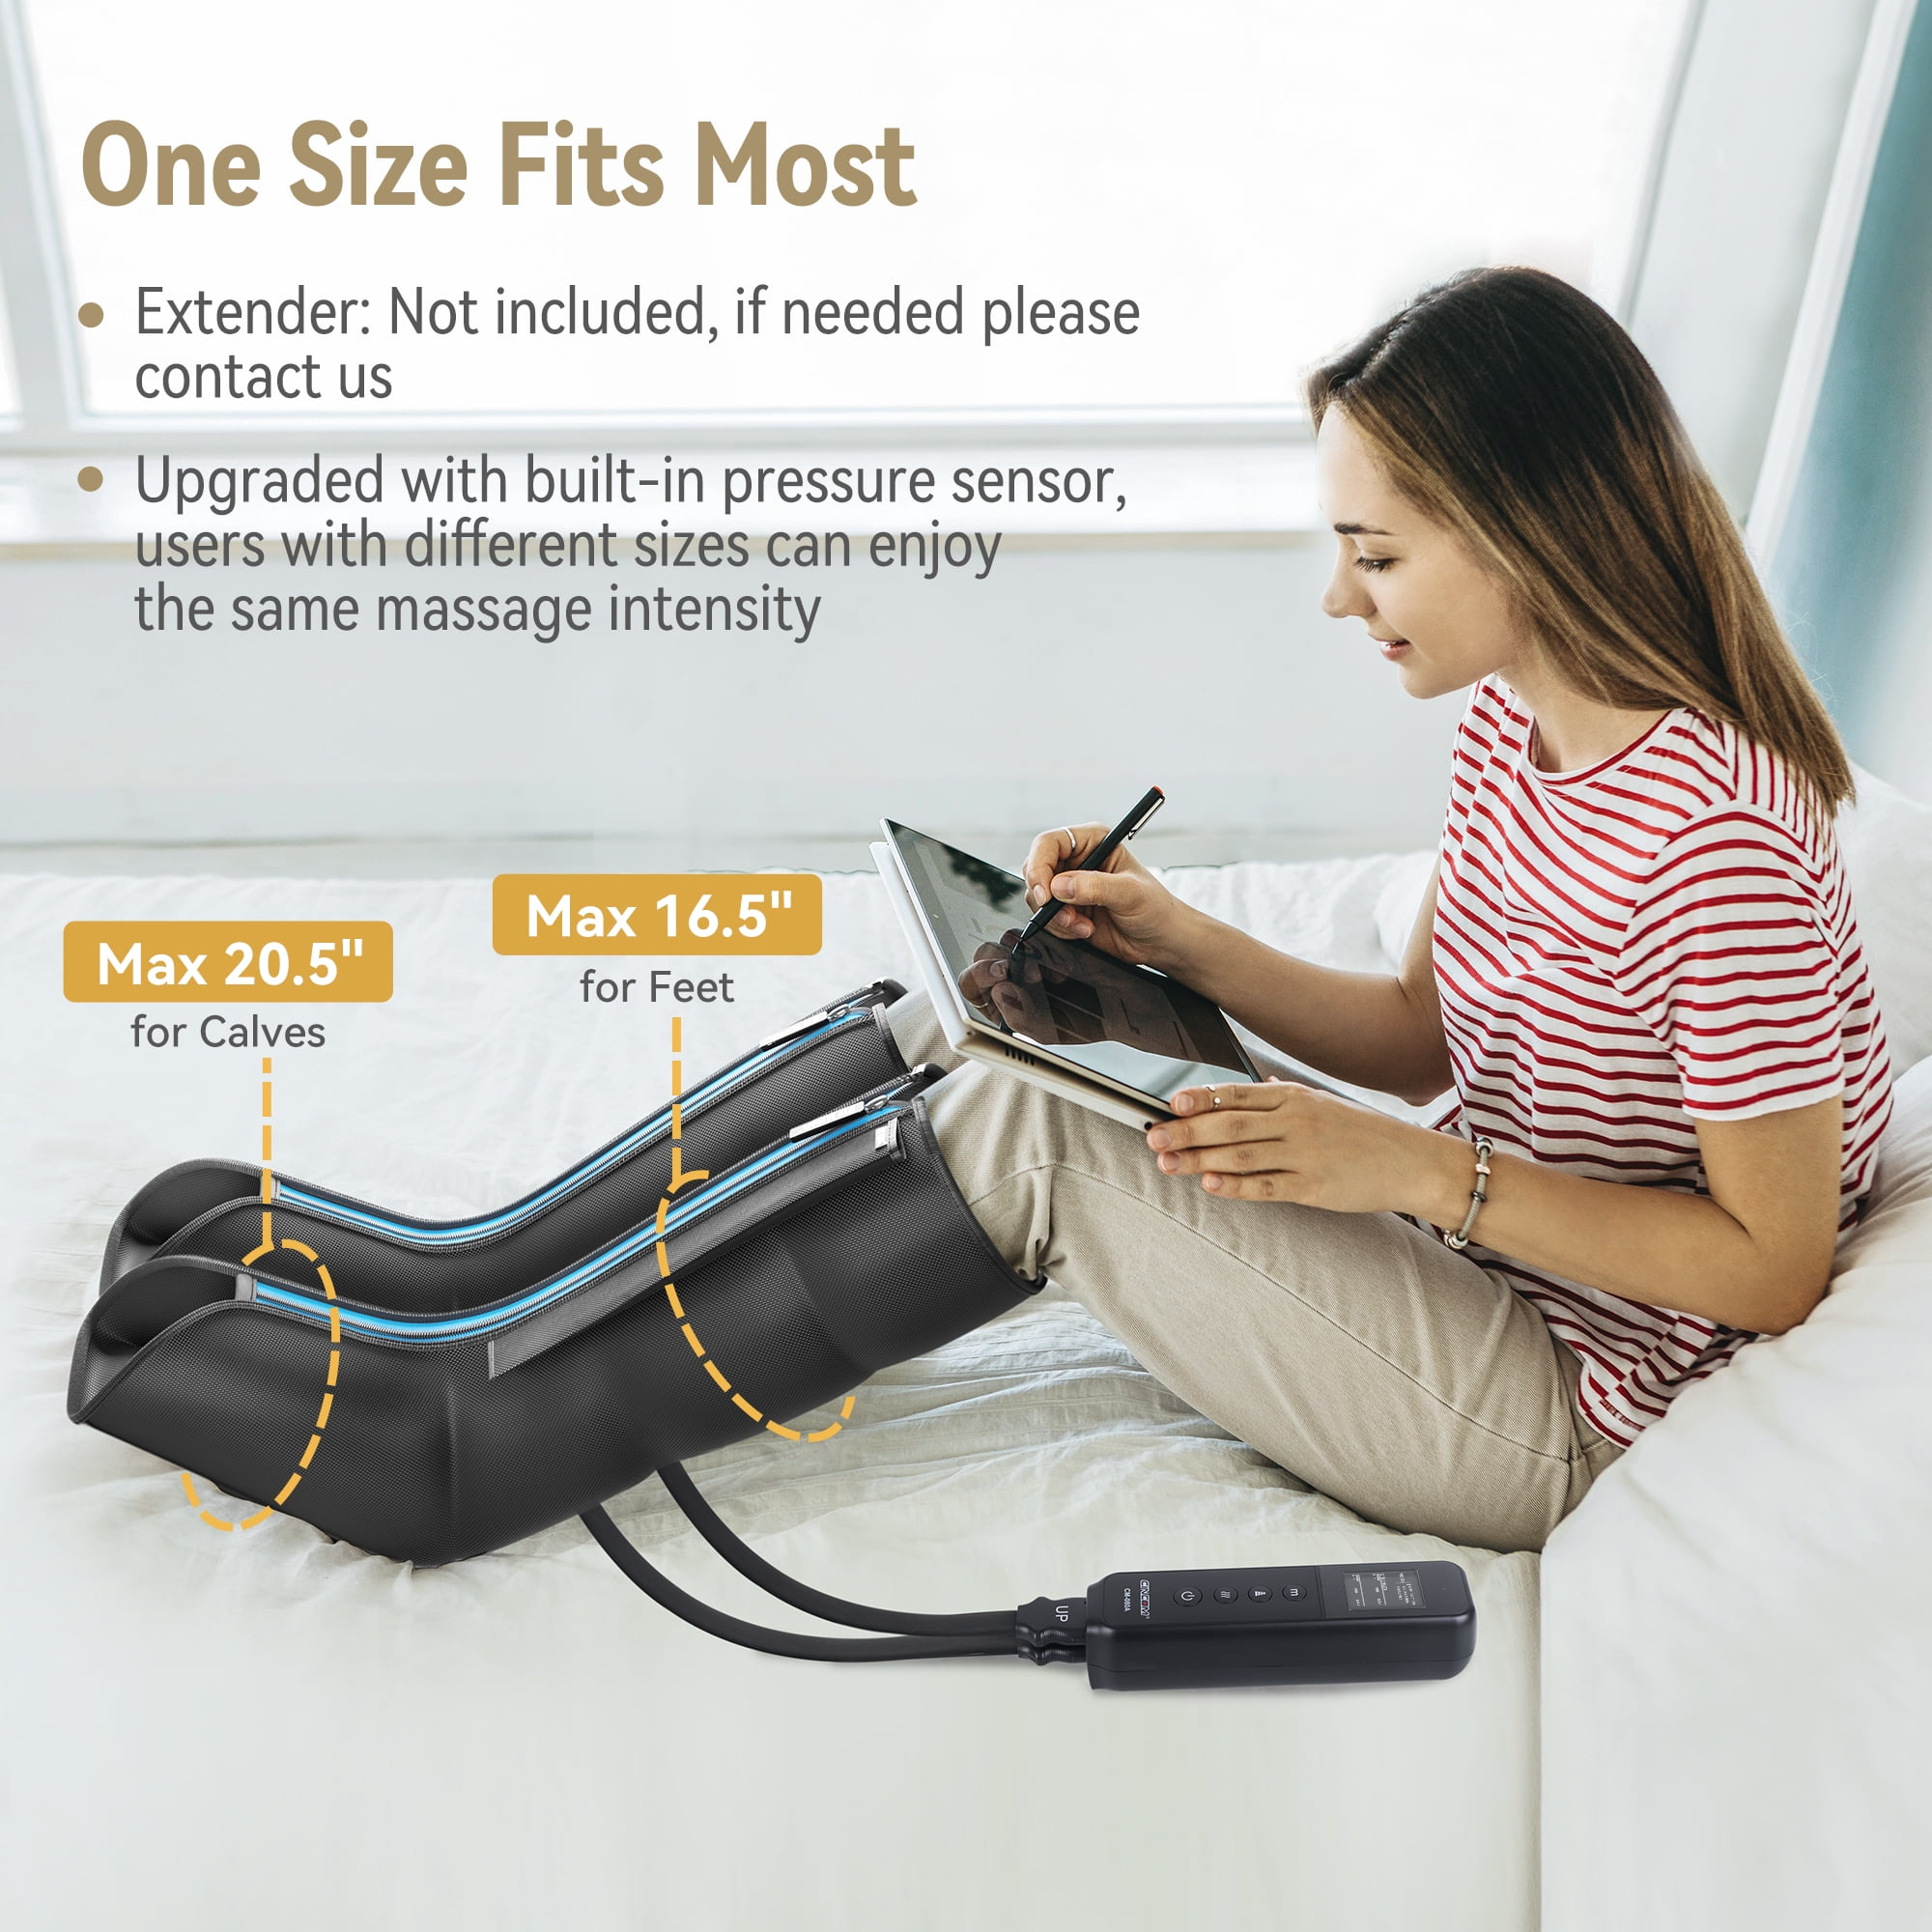  FIT KING Leg Massager with Heat for Circulation Upgraded Full  Leg and Foot Compression Boots Massager to Relieve Pain, Swelling, Edema,  RLS- Built-in Pressure Sensor & LCD Display- FSA HSA Eligible 